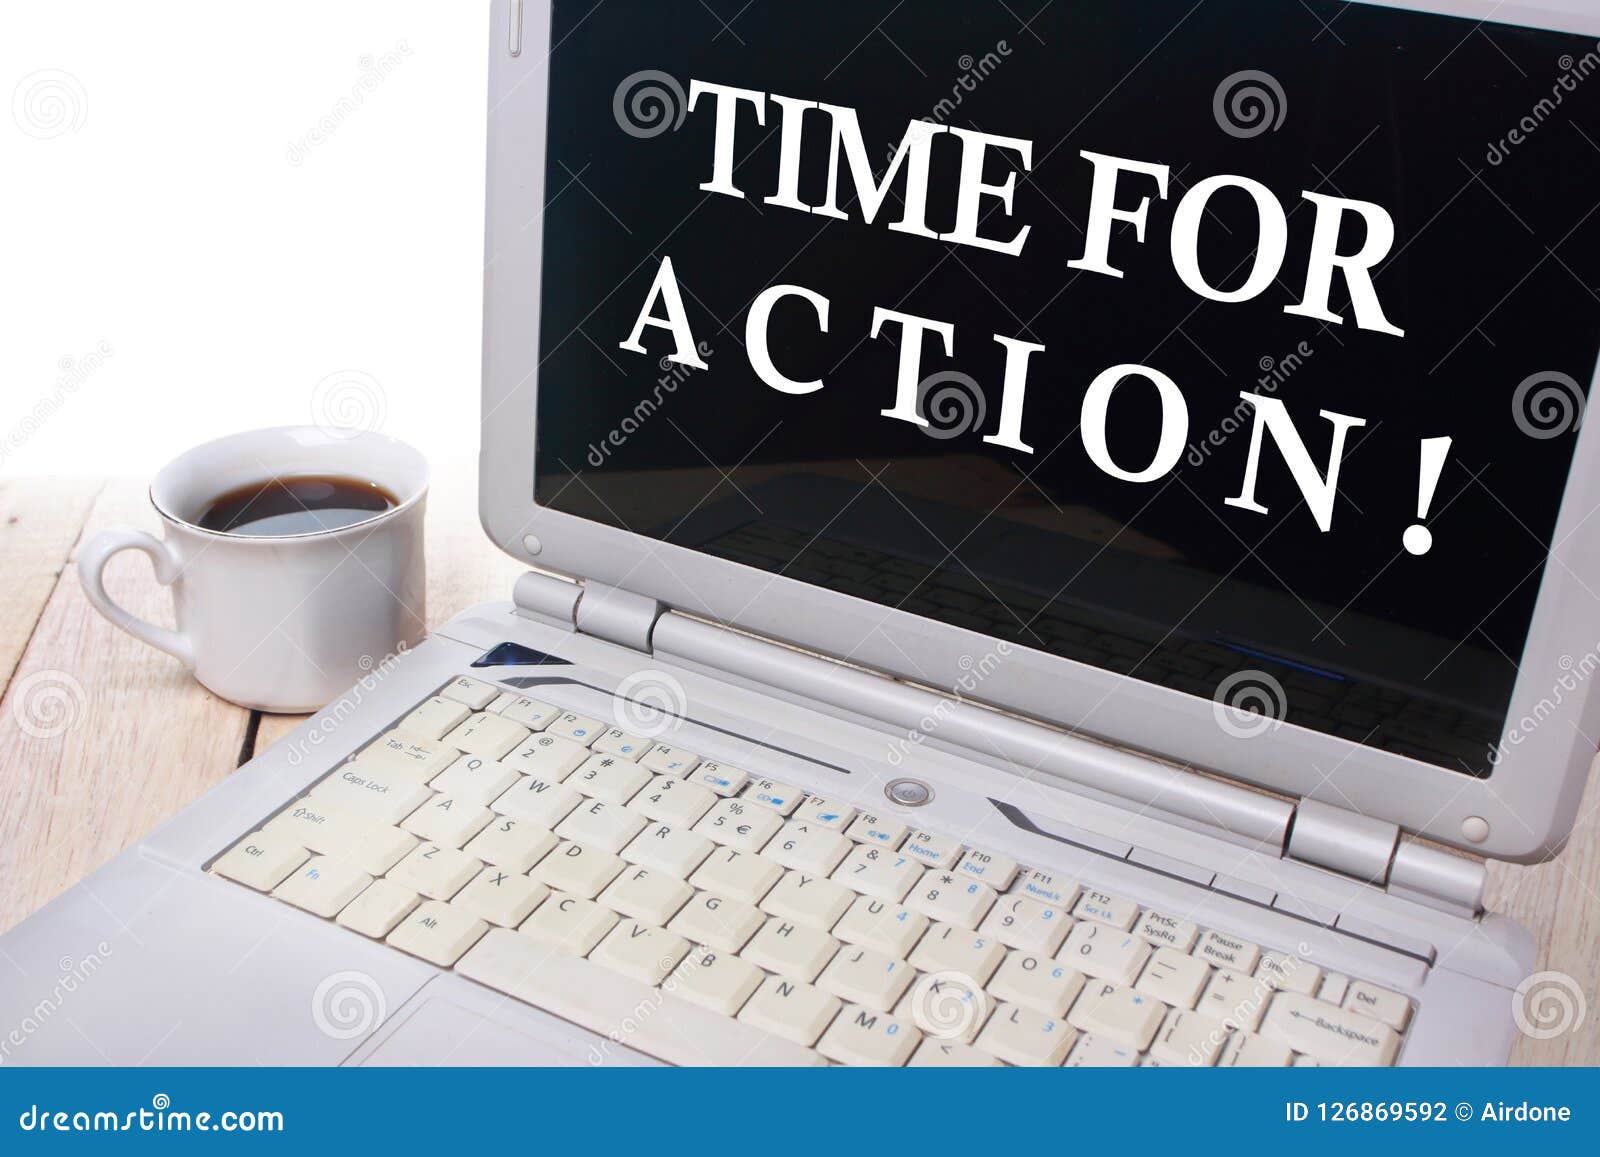 Time For Action Motivational Words Quotes Concept Stock Photo